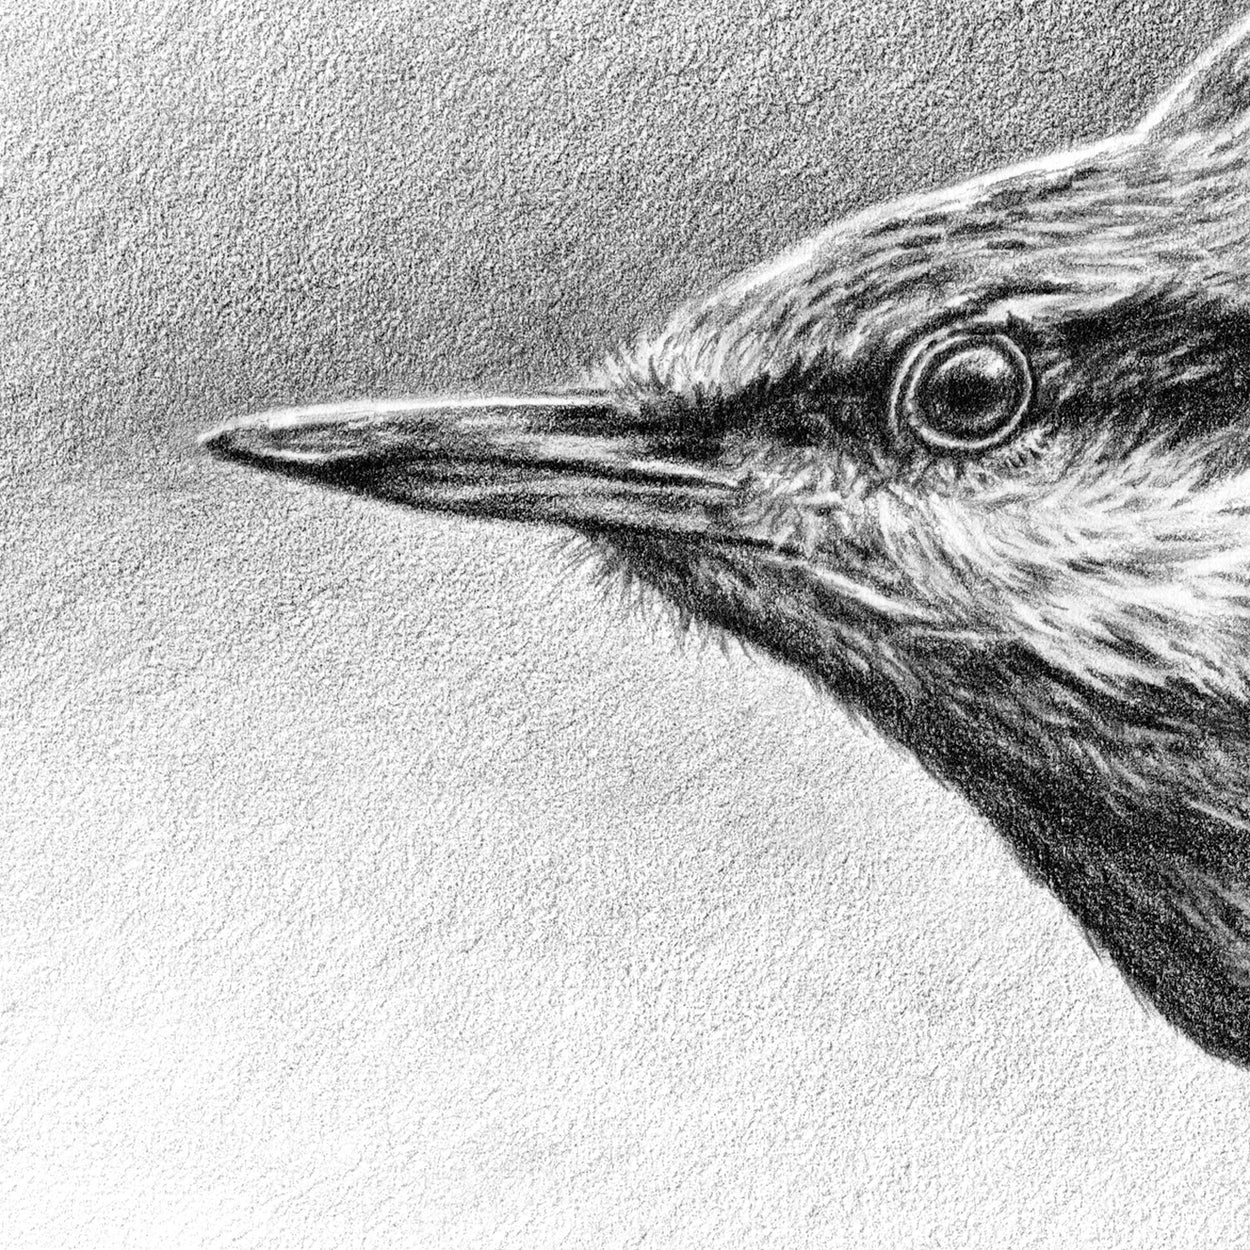 Nuthatch Drawing Close-up 1 - The Thriving Wild